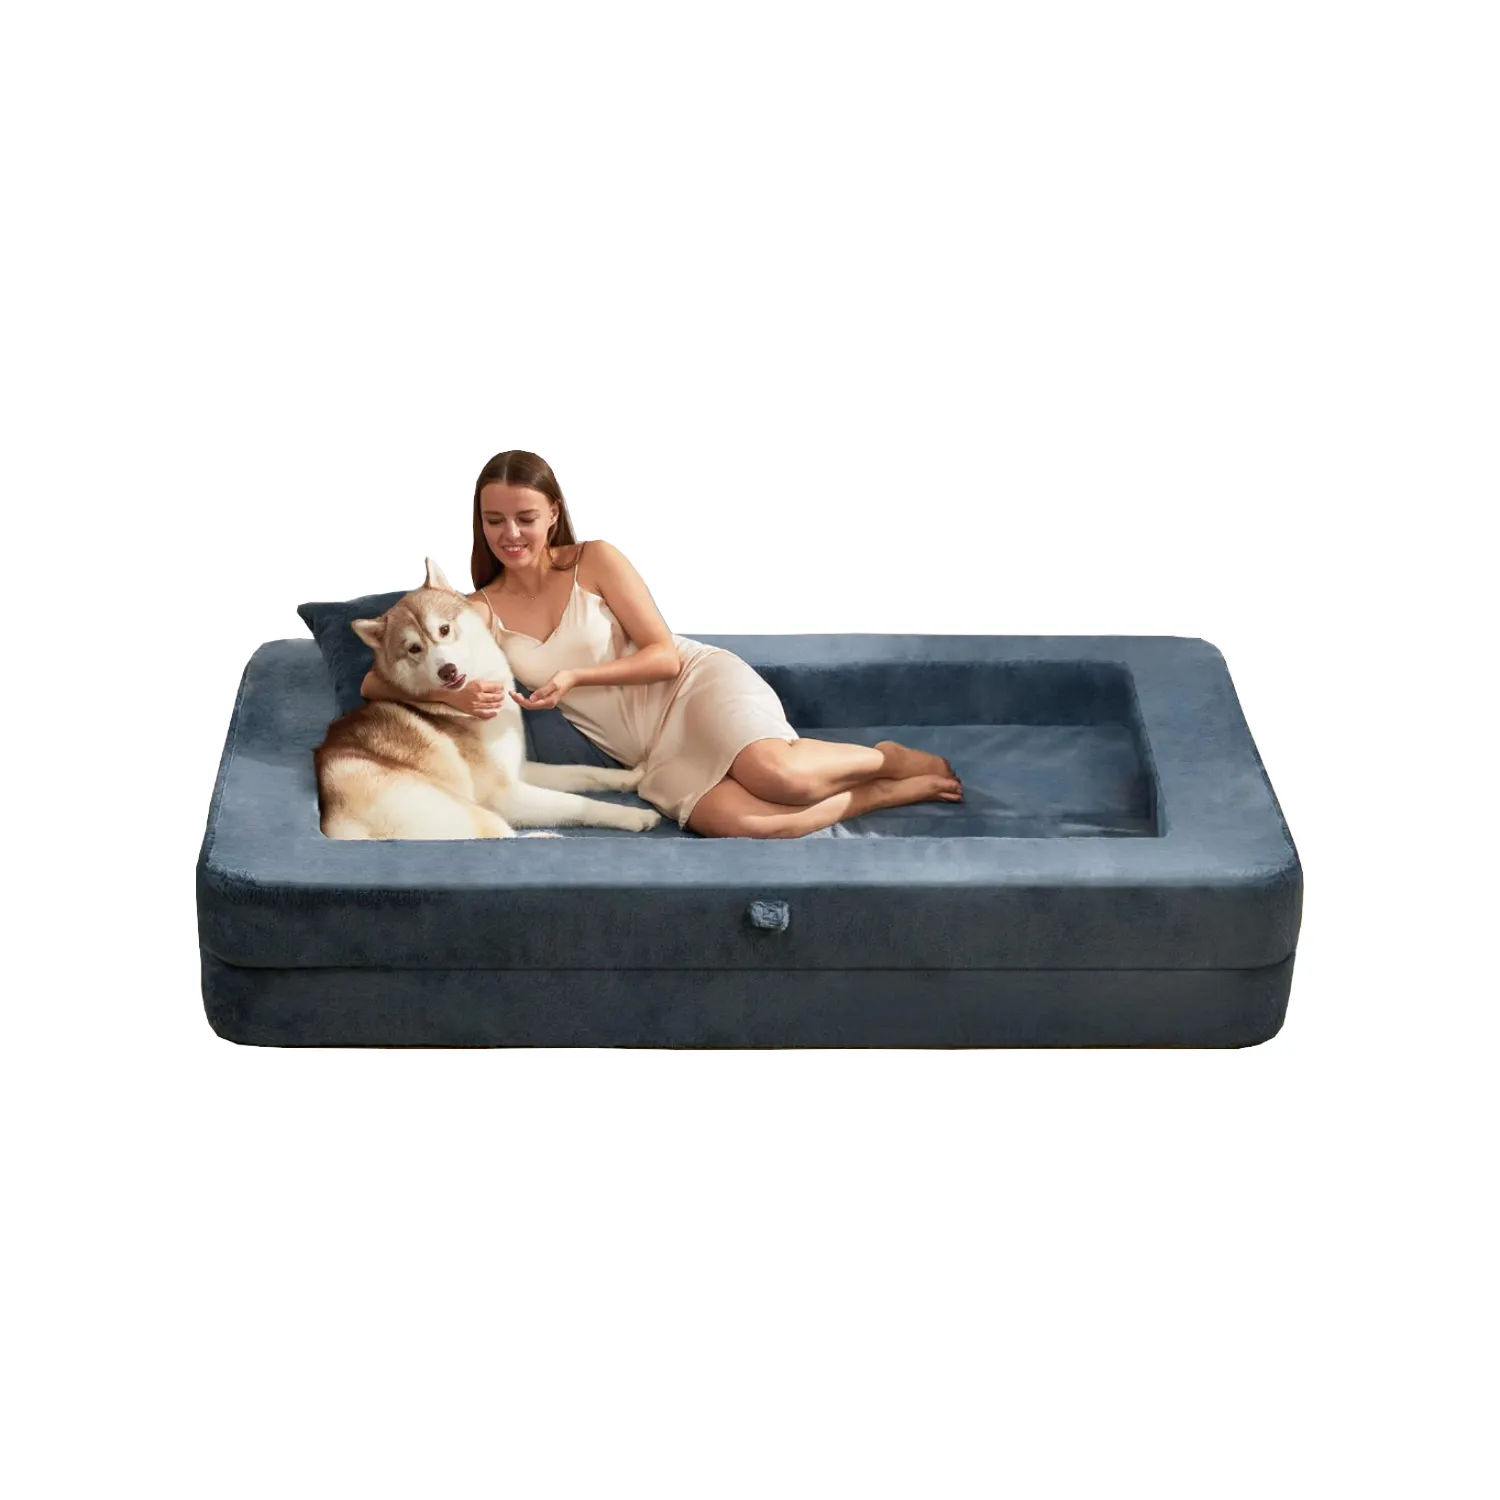 Factory Portable Folding Sofa Bed Convertible Cum SleeperBed Living Room Furniture Couch Sofa fence dog Bed